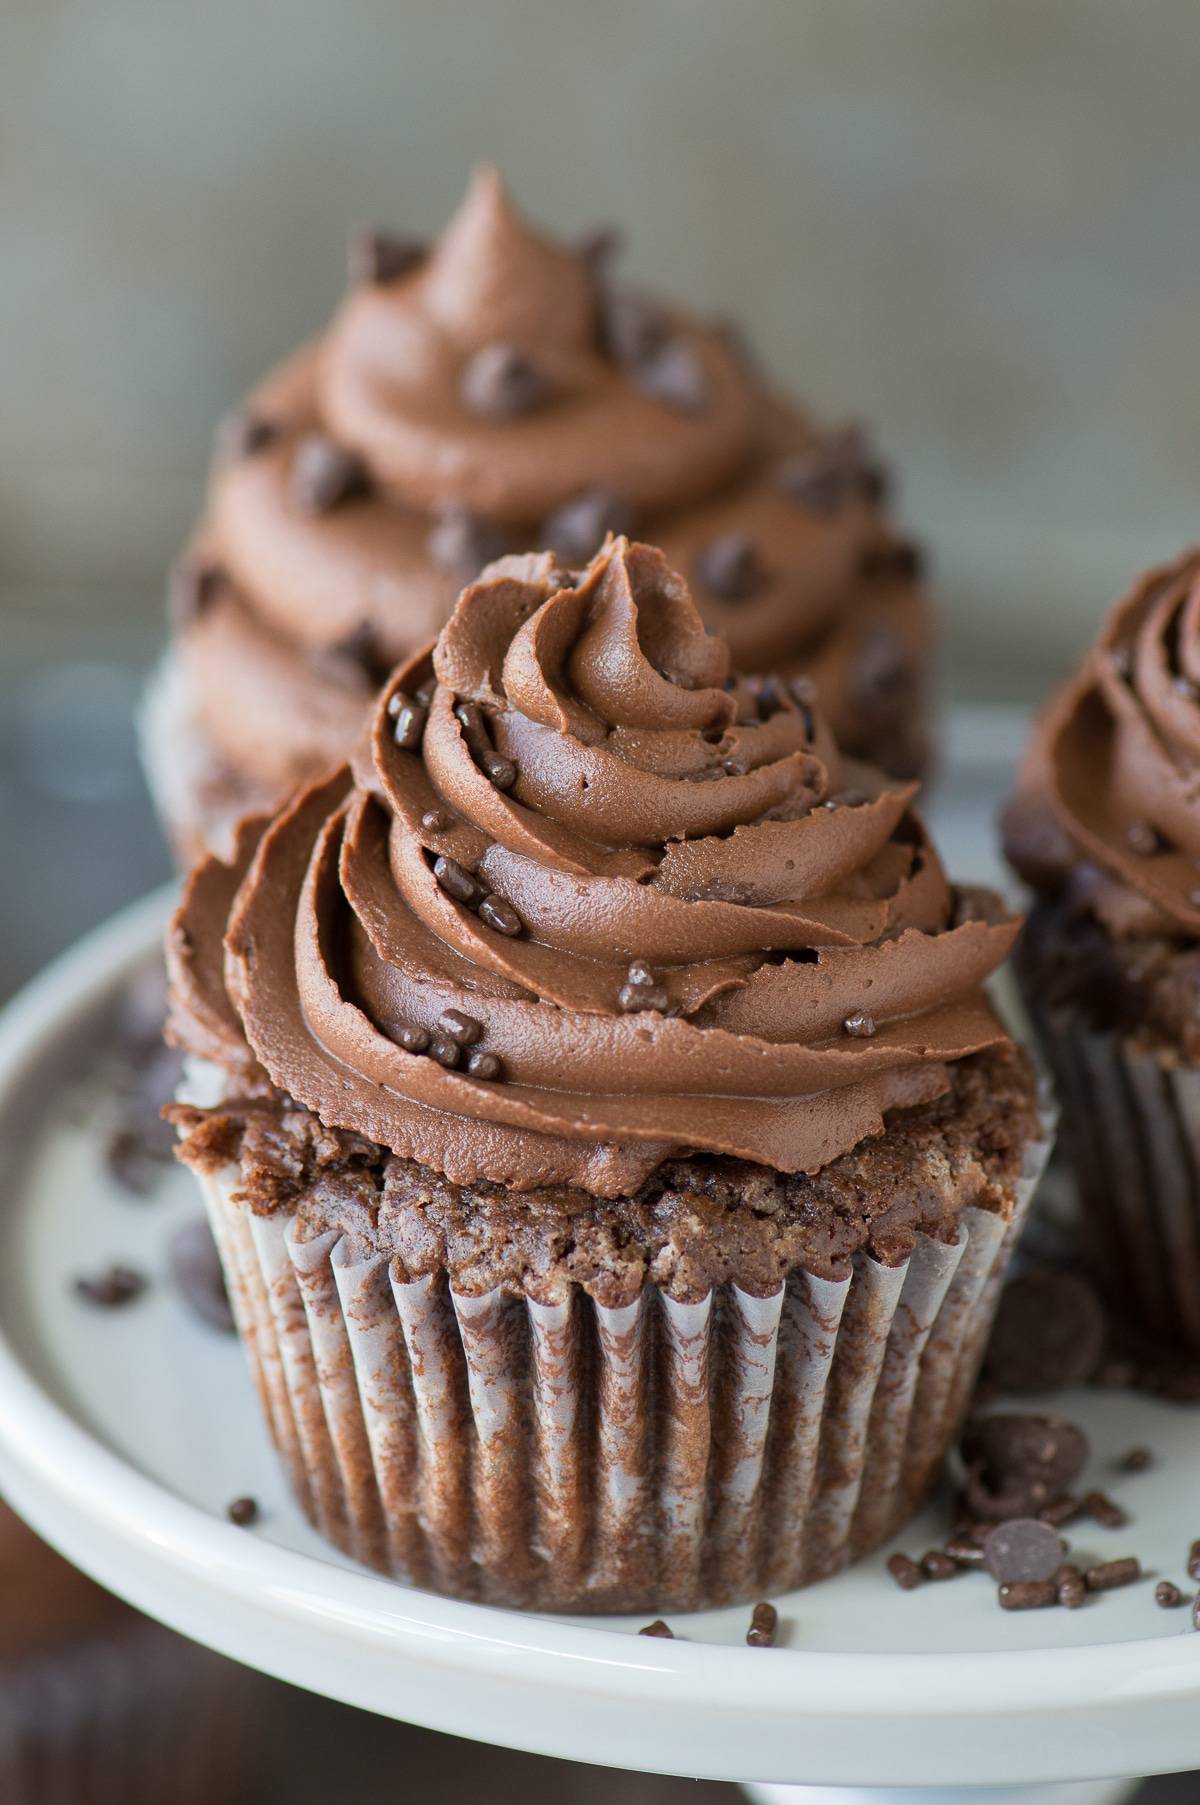 Chocolate Cupcakes - with real melted chocolate in the batter!